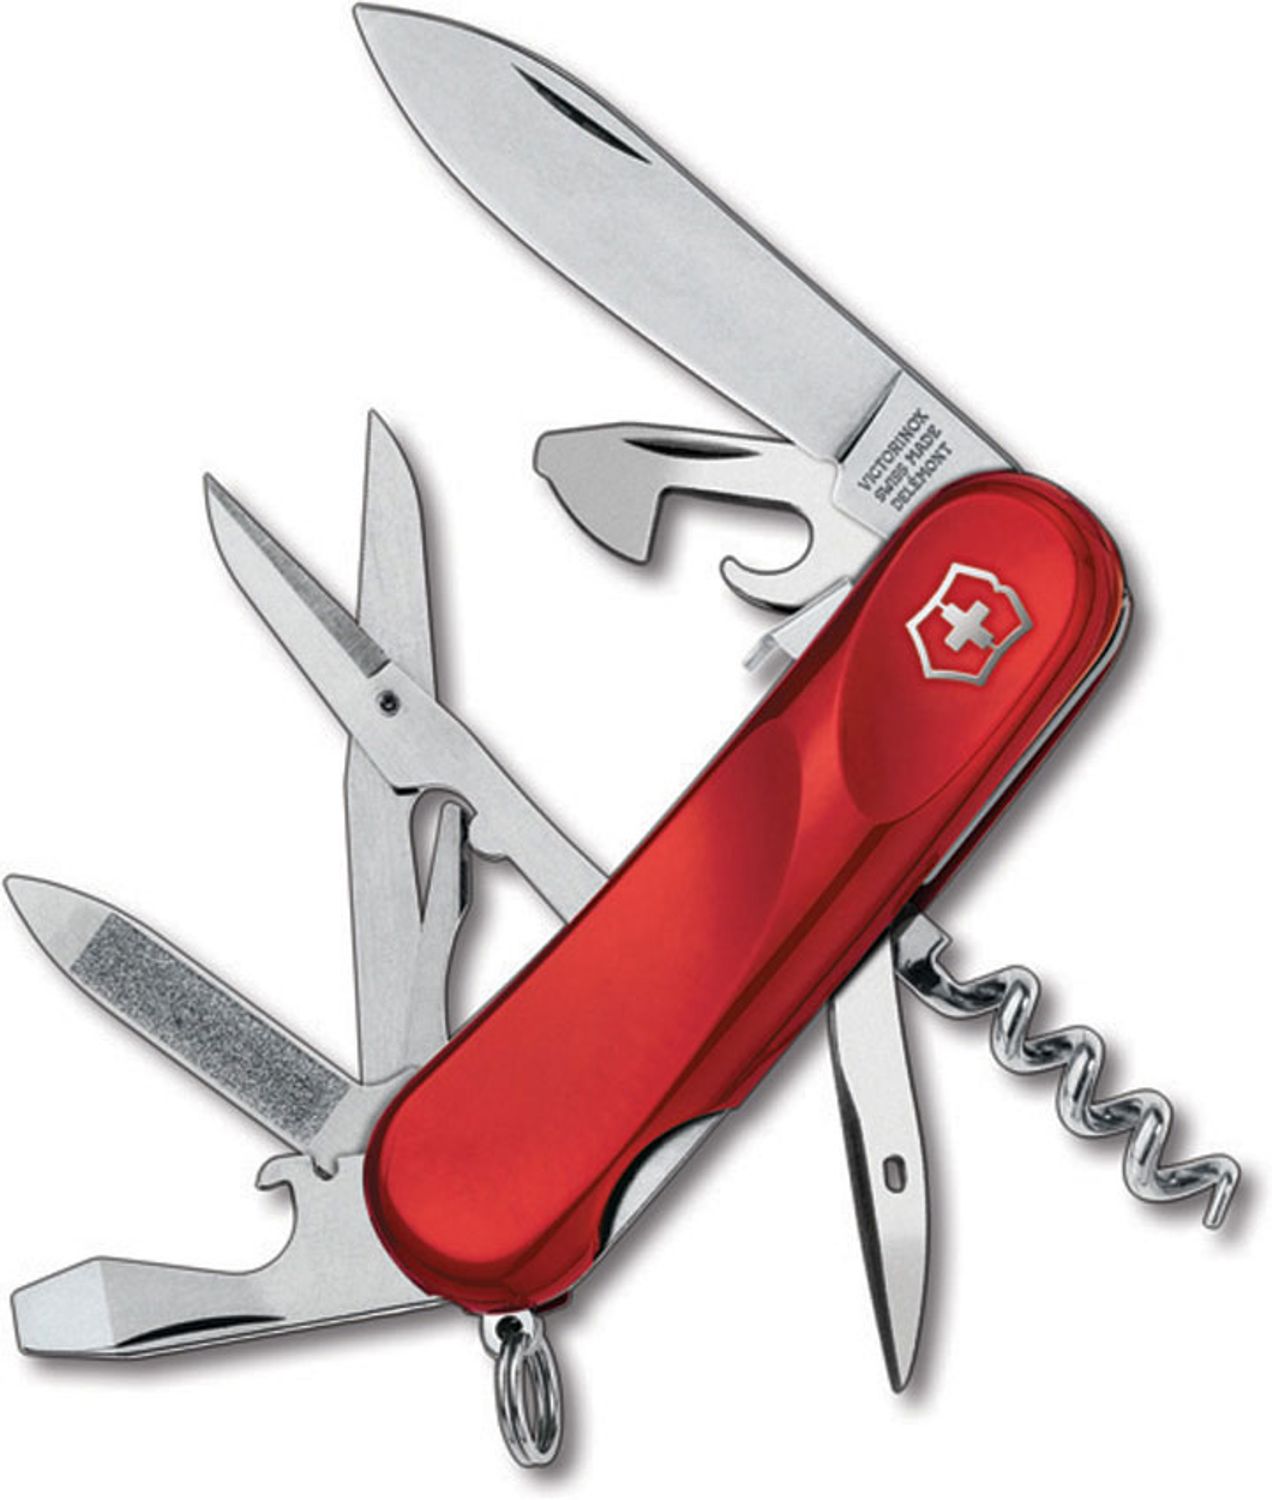 Details about   Victorinox Swiss Army Knives Evolution S14 Red 